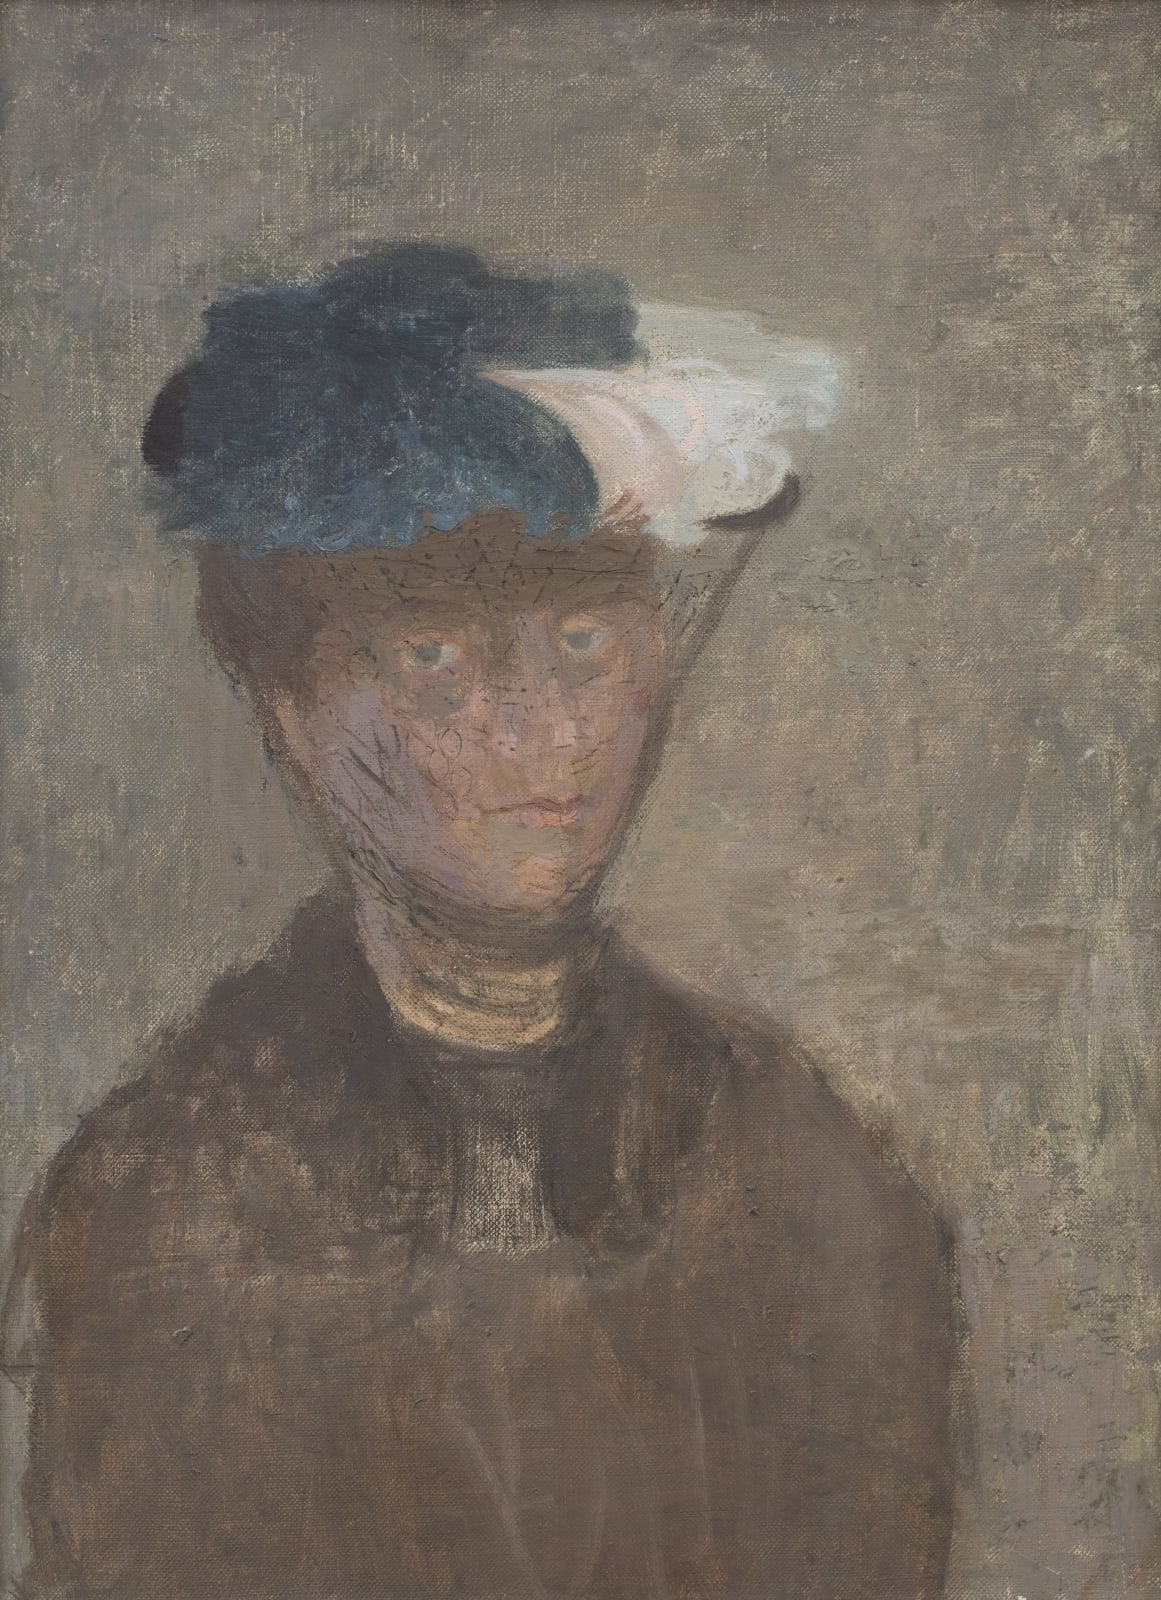 Mary Potter, Self-Portrait in Hat, 1953